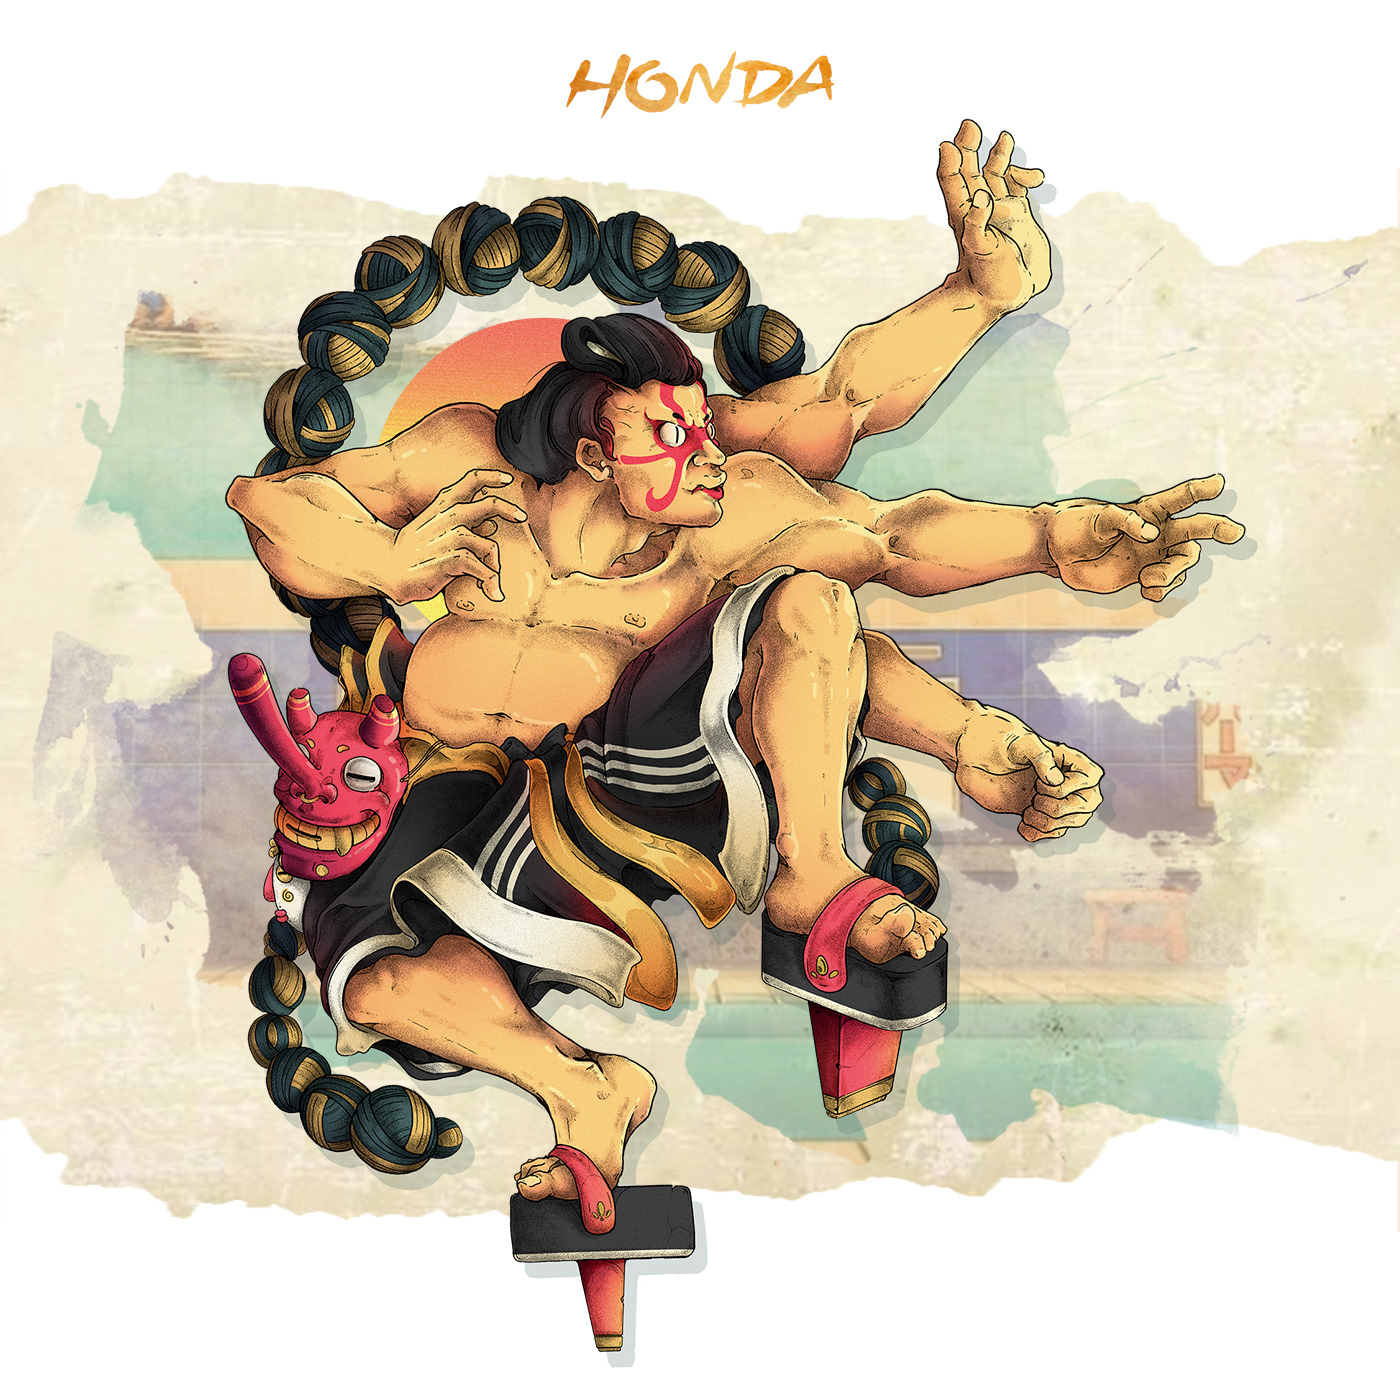 Ultra Street Fighter IV Character Designs on Behance